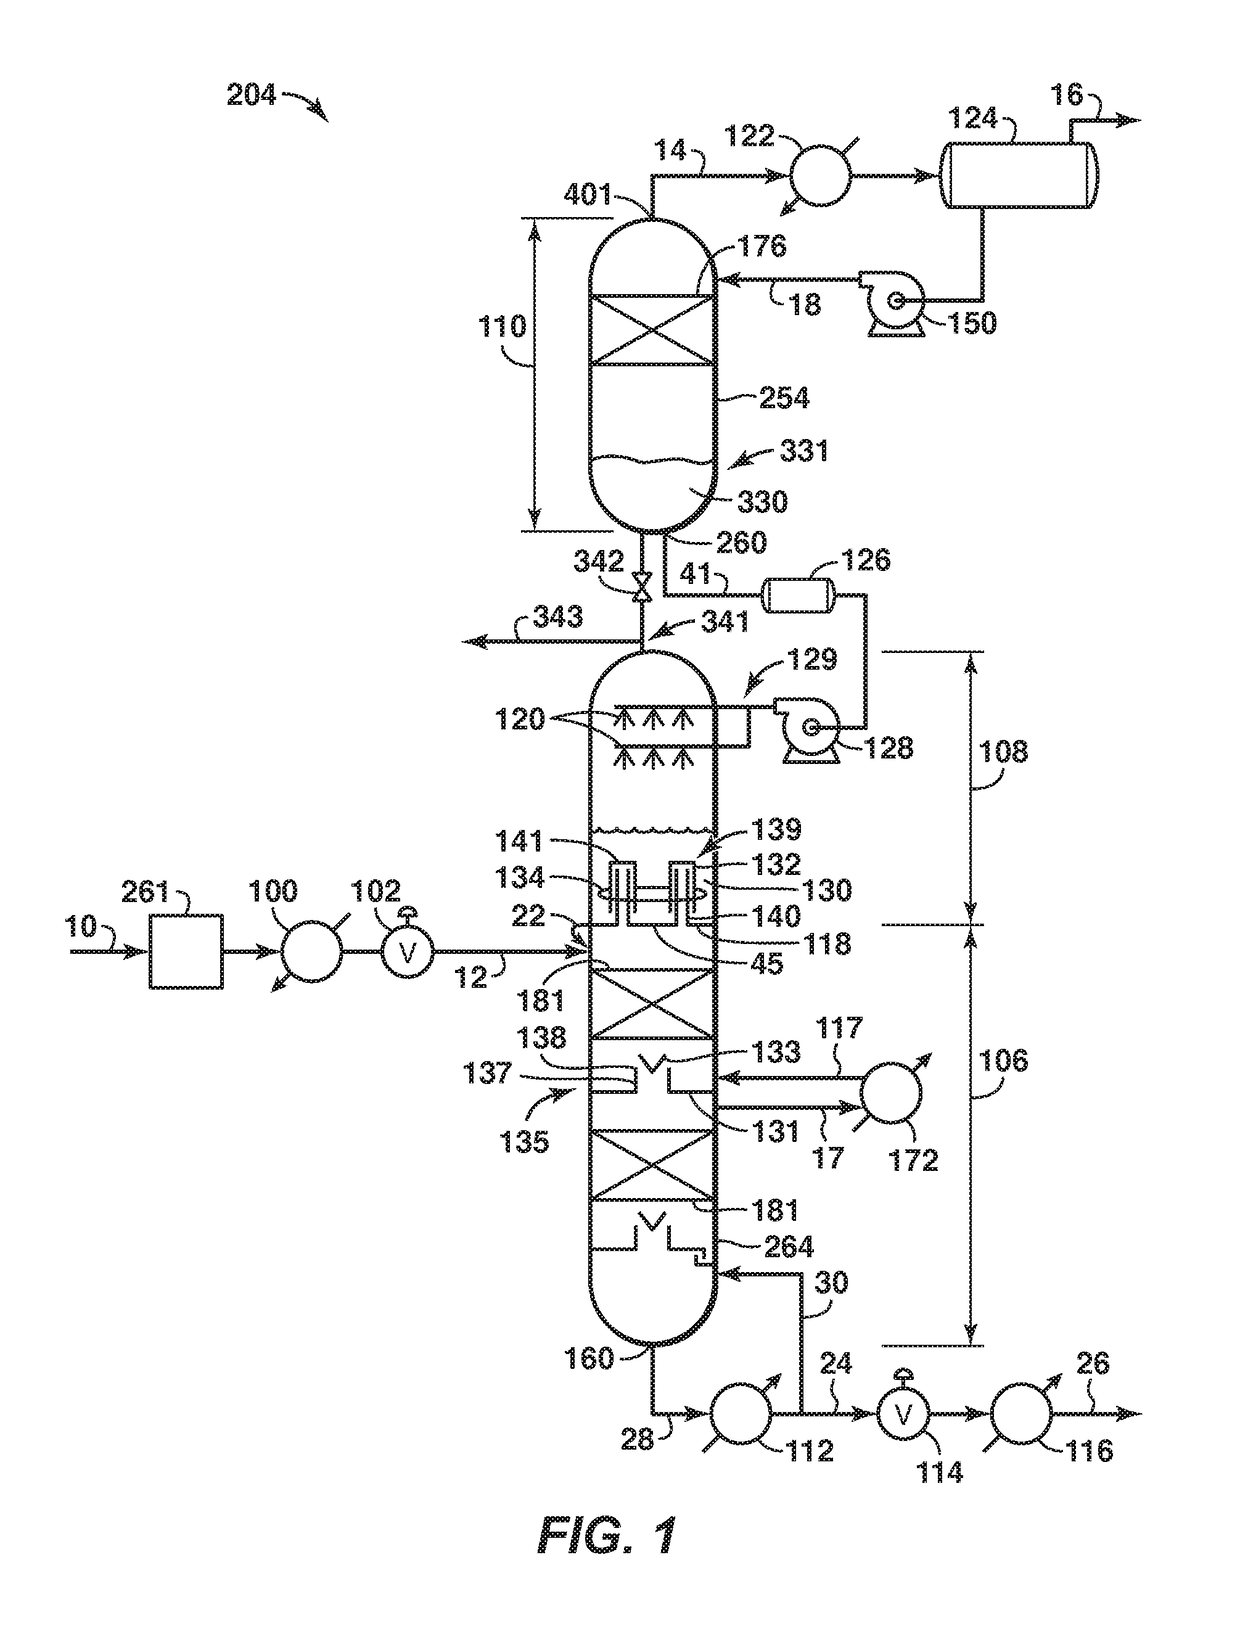 Method and system for separating fluids in a distillation tower